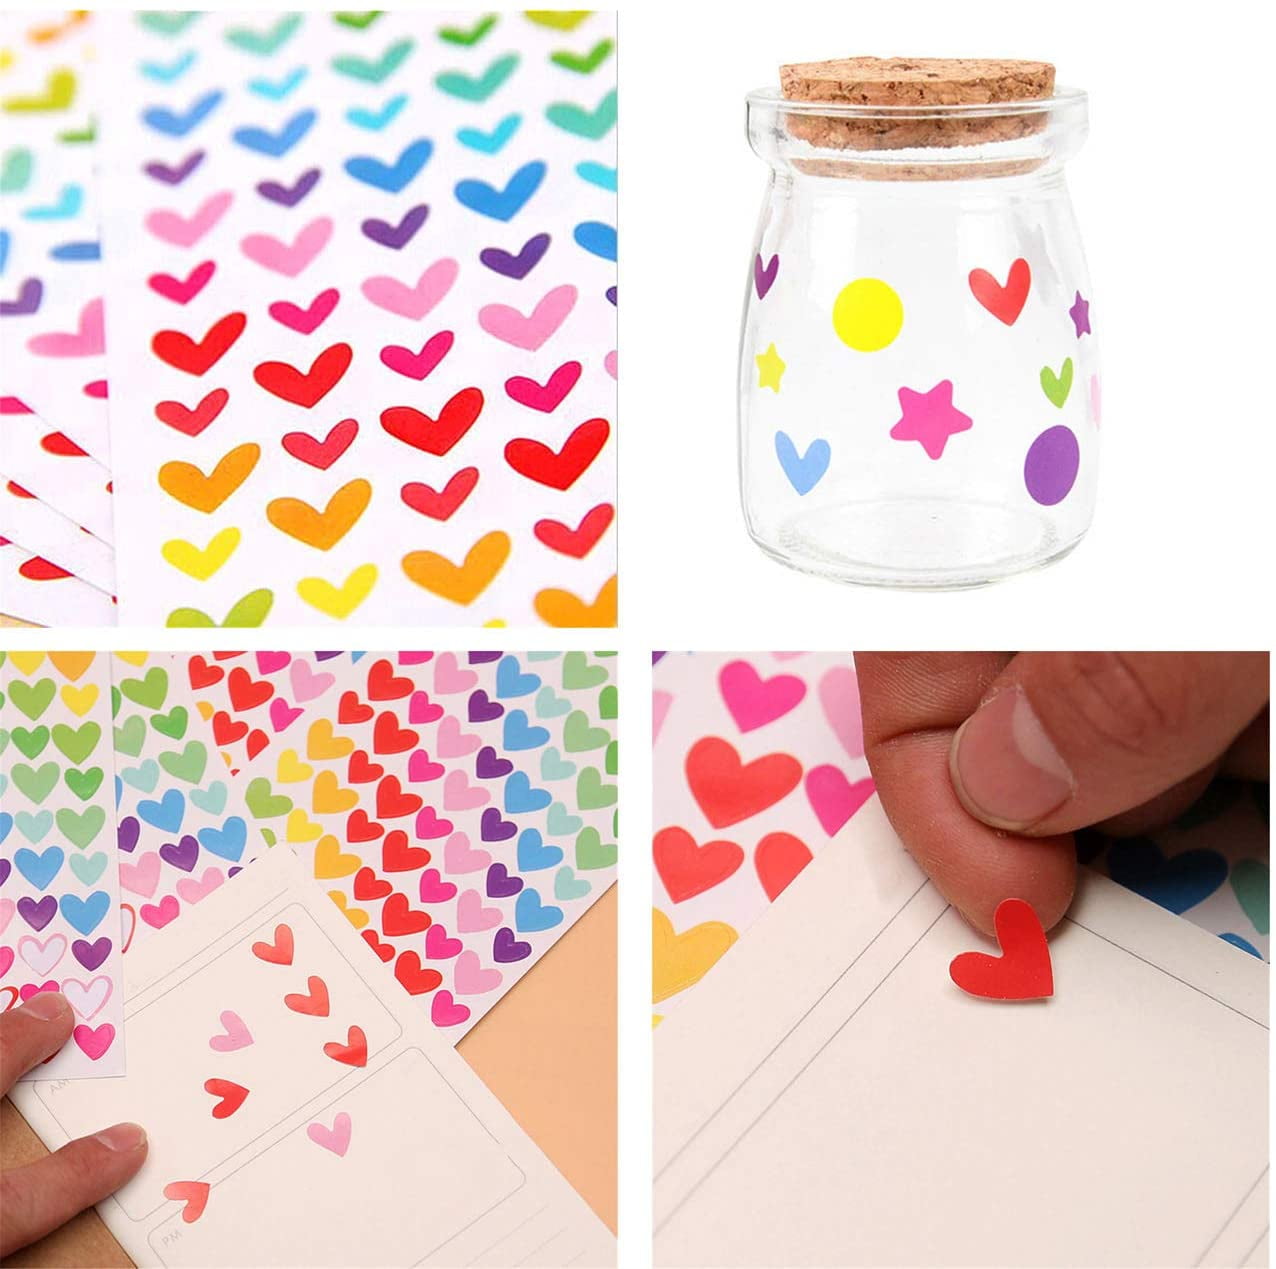 for Scrapbooking and Kid DIY Arts Crafts Hearts, 18 Sheets 18 Sheets 1512 Pcs Colorful Heart Shape Self Adhesive Stickers 